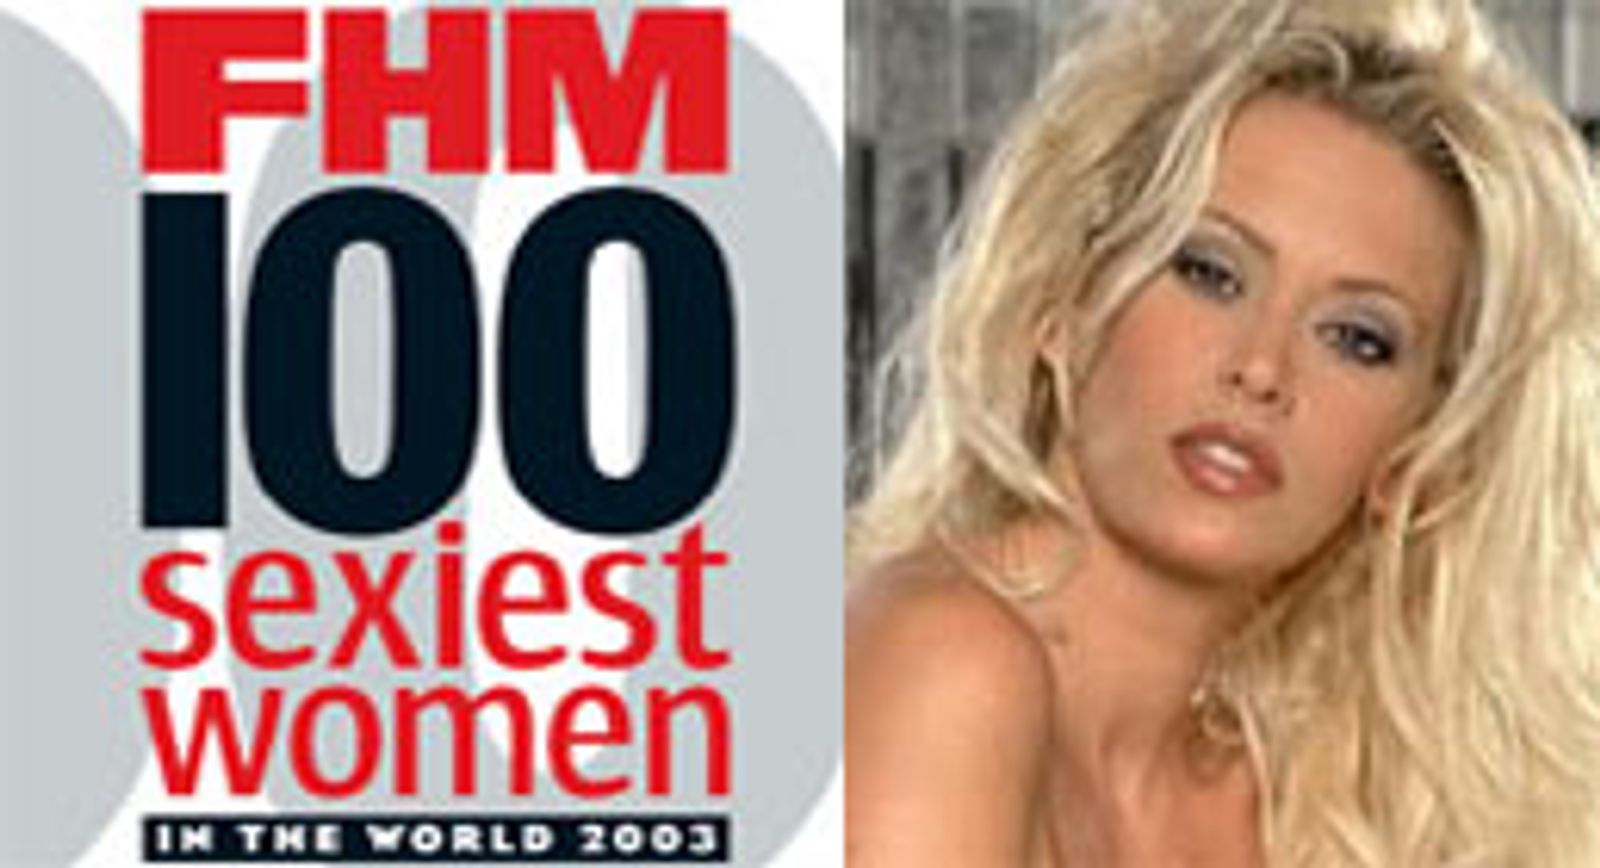 Jenna Jameson Makes <I>FHM</I>'s "100 Sexiest Women In the World" List - Again